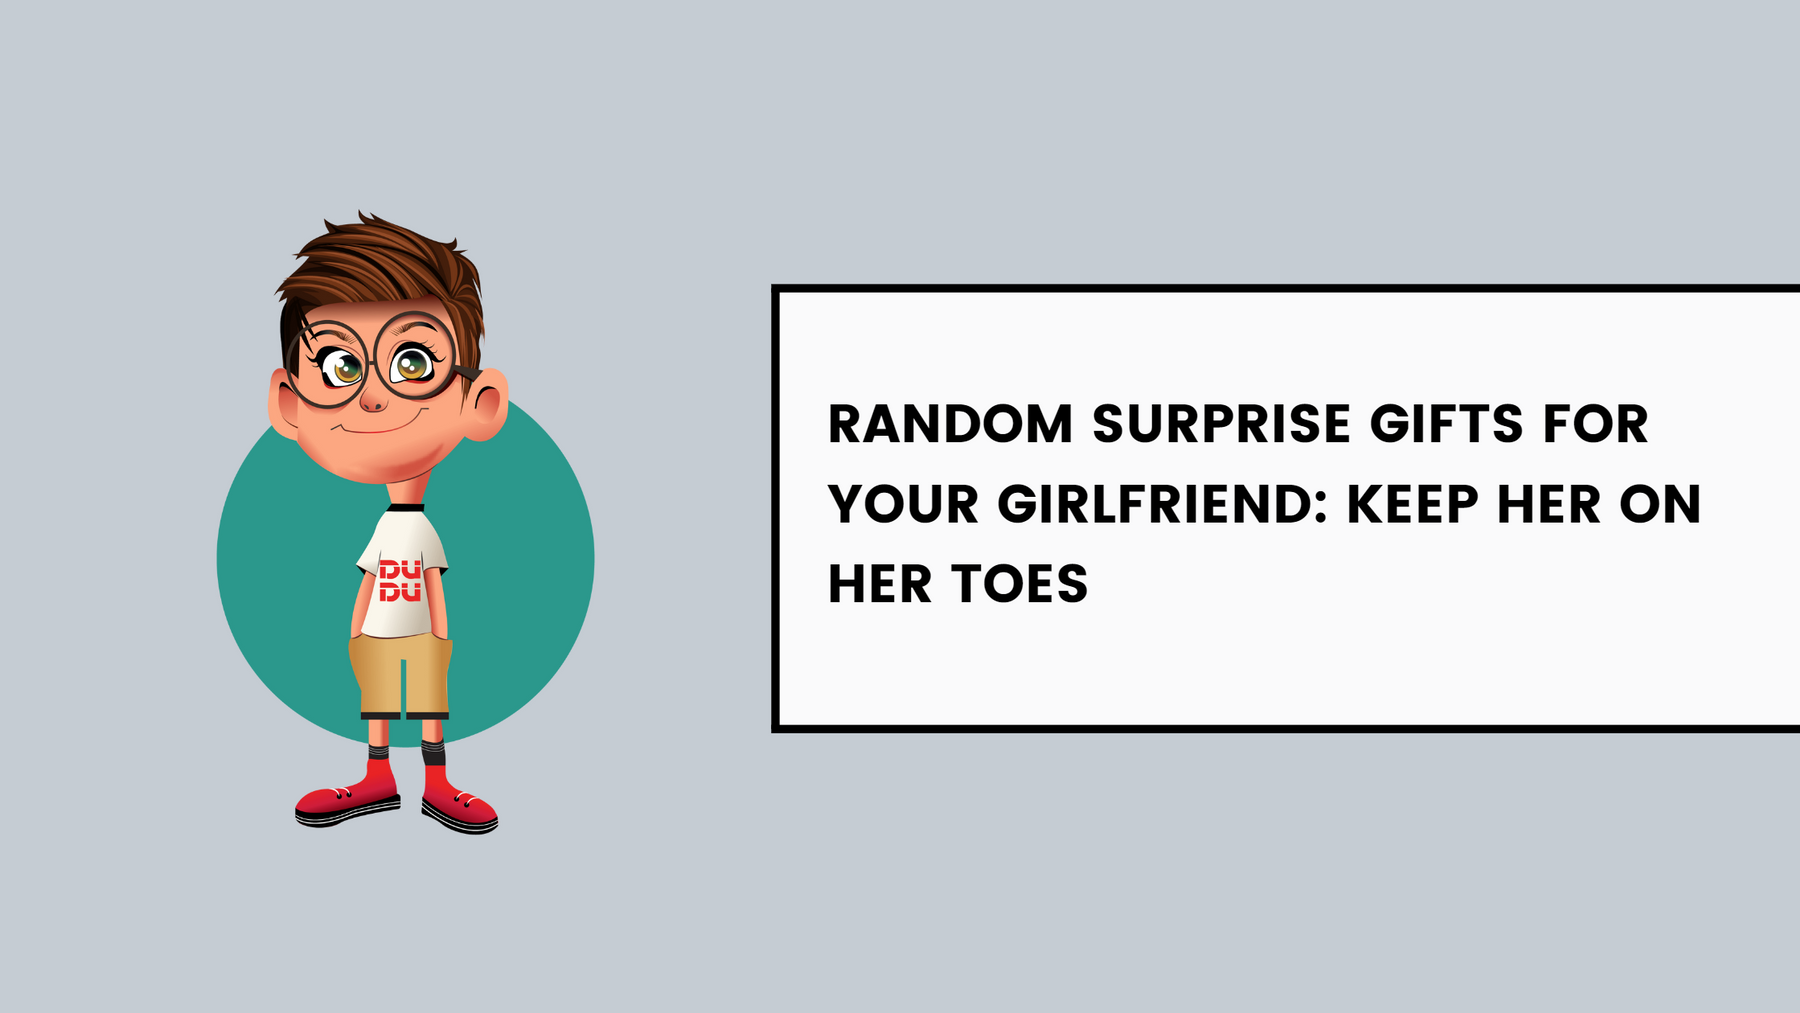 Random Surprise Gifts For Your Girlfriend: Keep Her On Her Toes